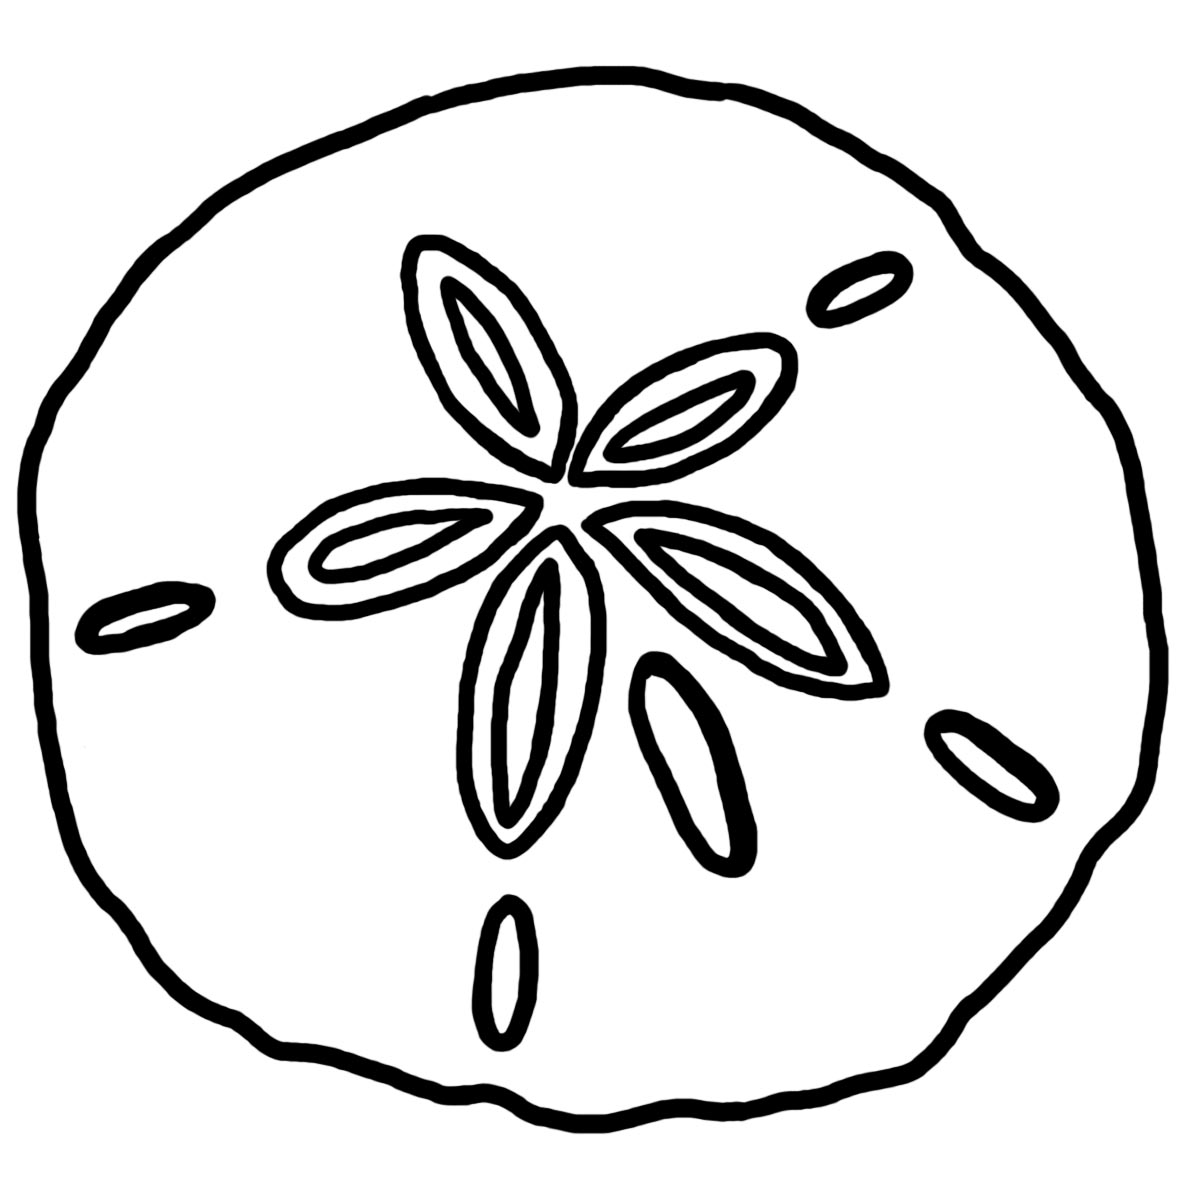 Beach ball coloring pages - Coloring Pages & Pictures - IMAGIXS